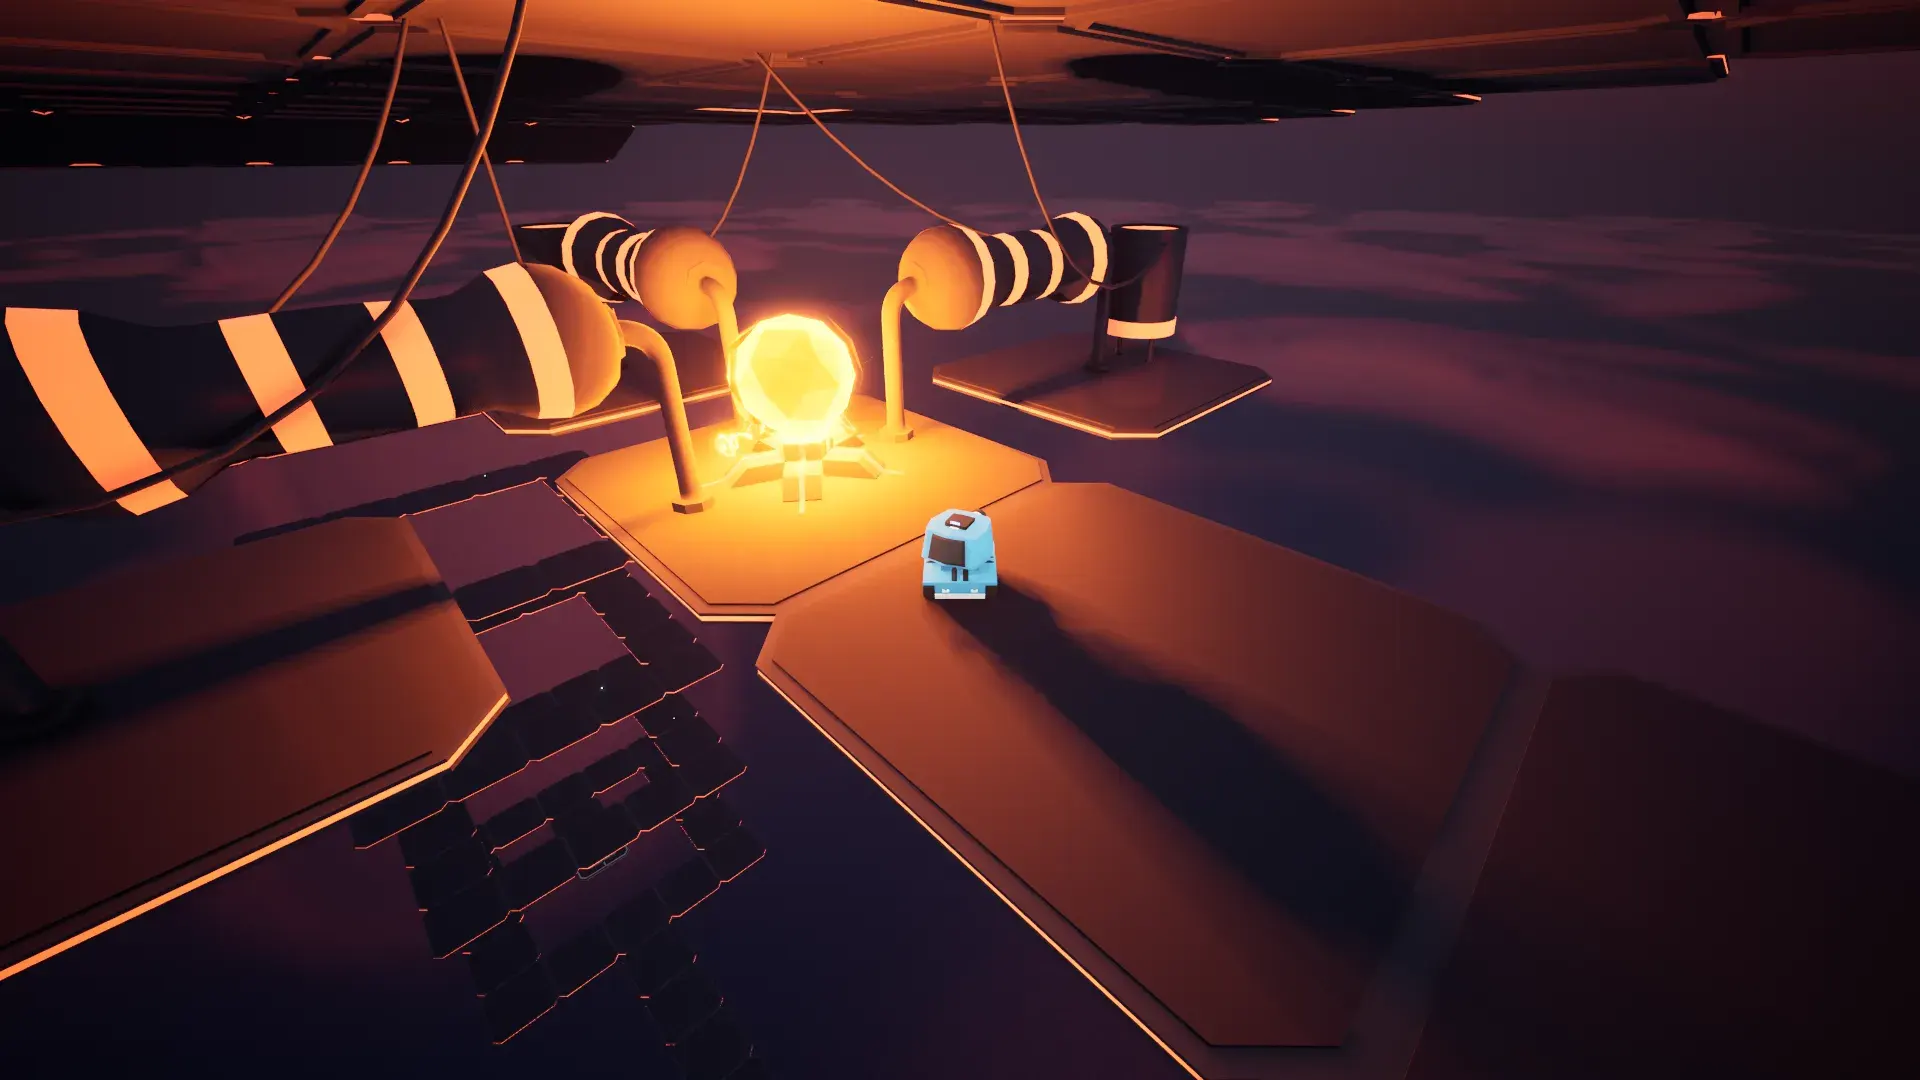 Screenshot 5: Tank discovering a mysterious power source